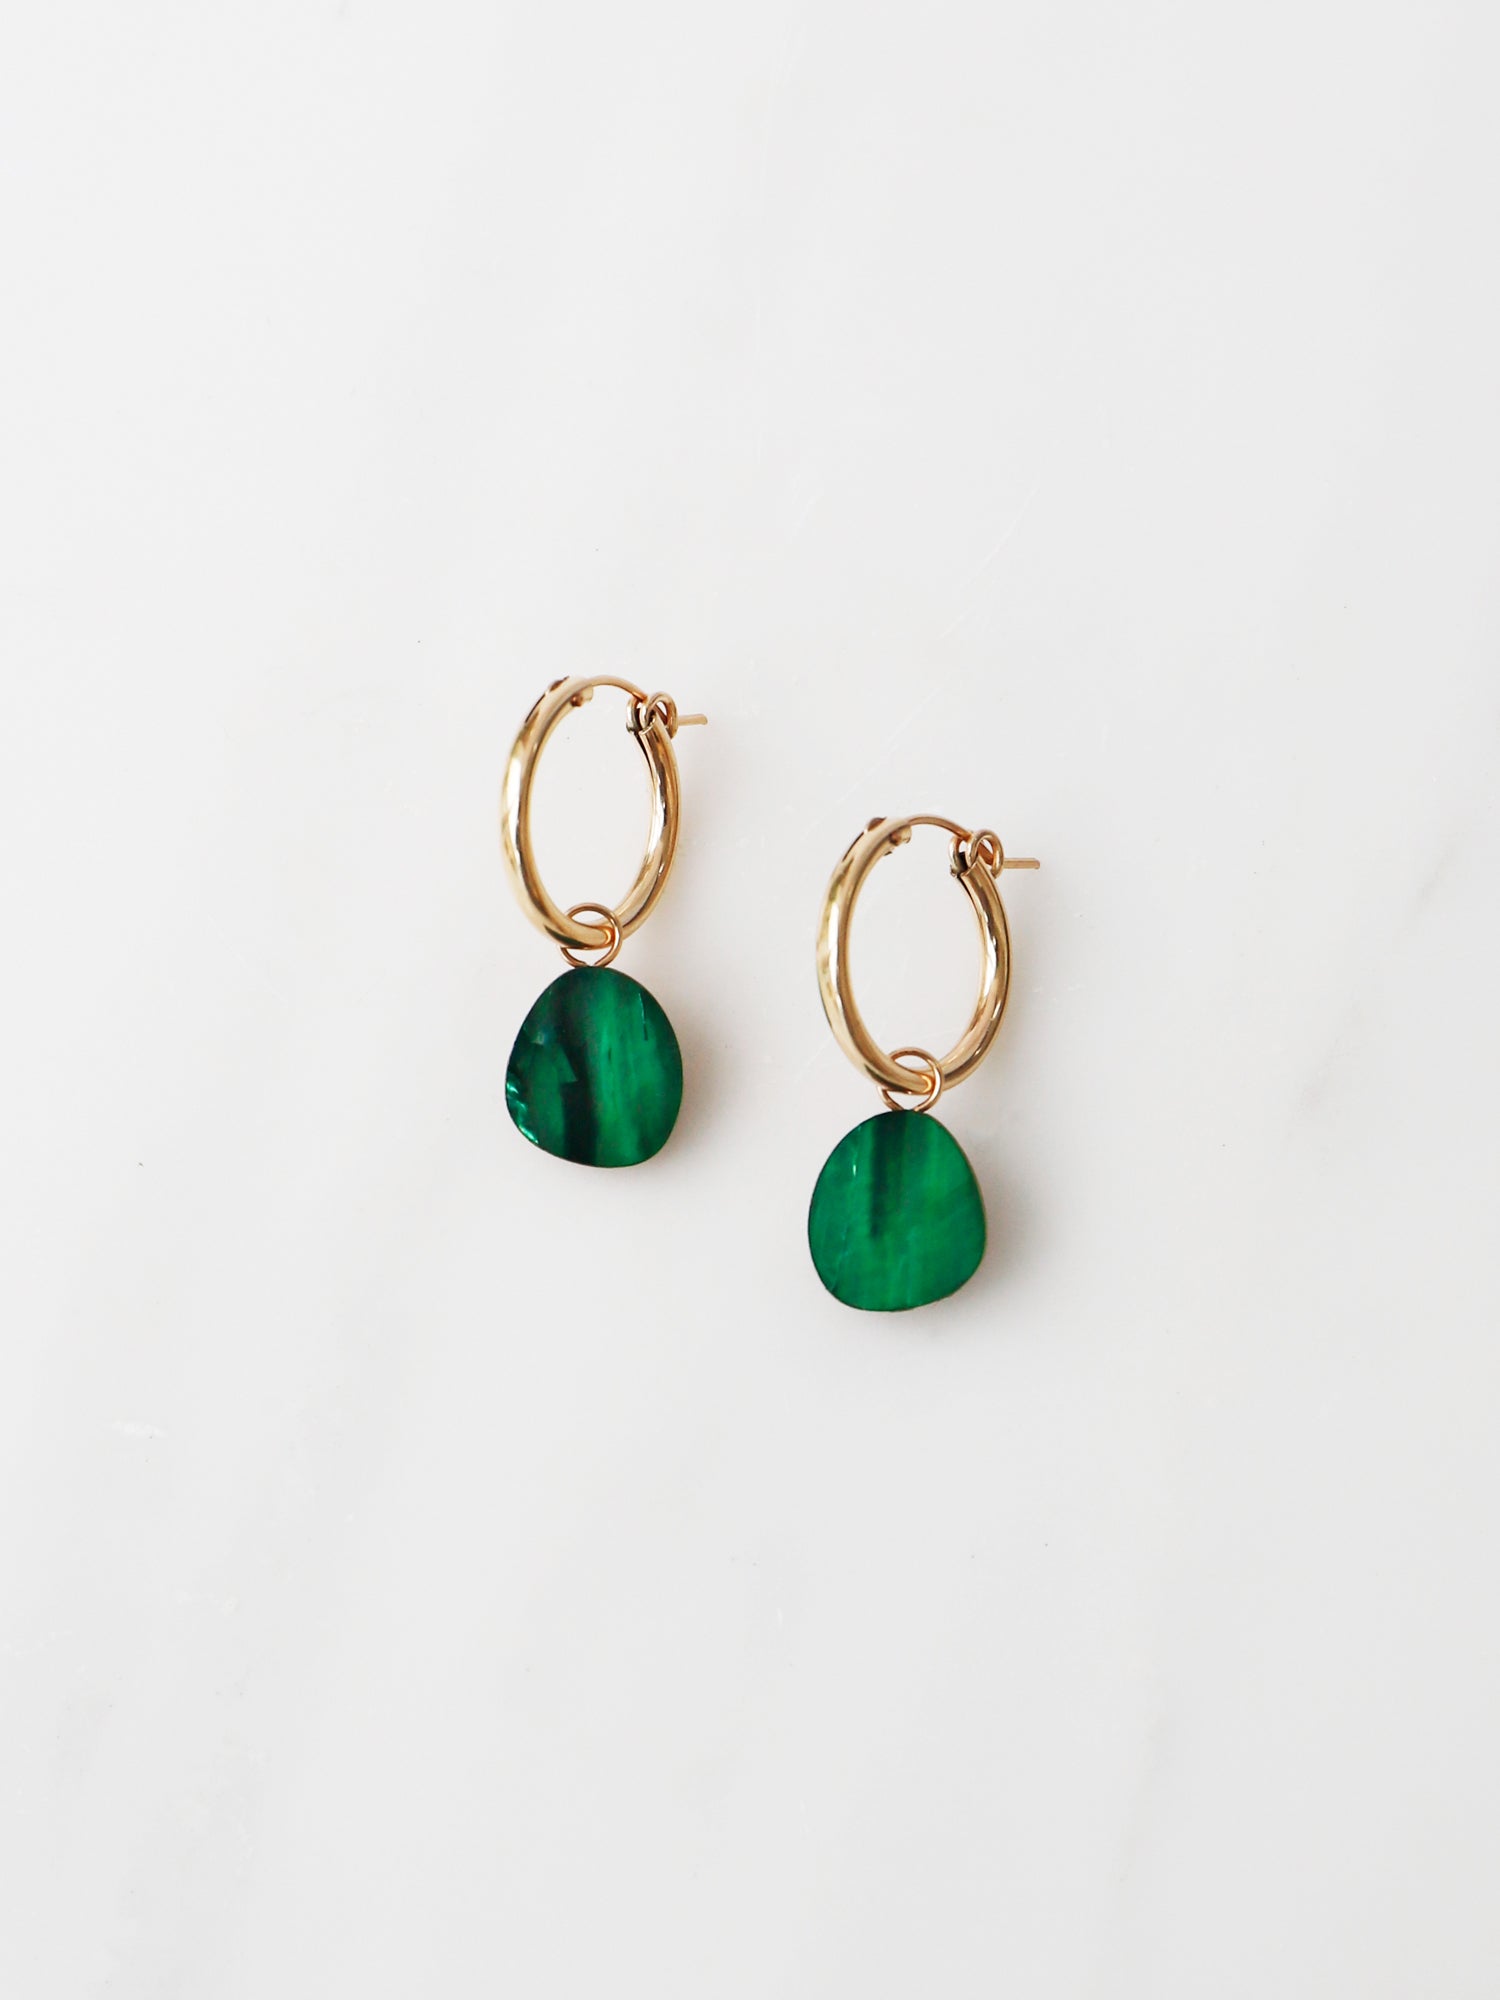 Beatrice Hoops in Emerald. Simple abstract form charm earrings. Made with emerald mother of pearl veneer on our signature wooden base and gold-filled findings. Available with 19mm gold-filled hoops or just as charms on their own. Handmade in the UK by Wolf & Moon.